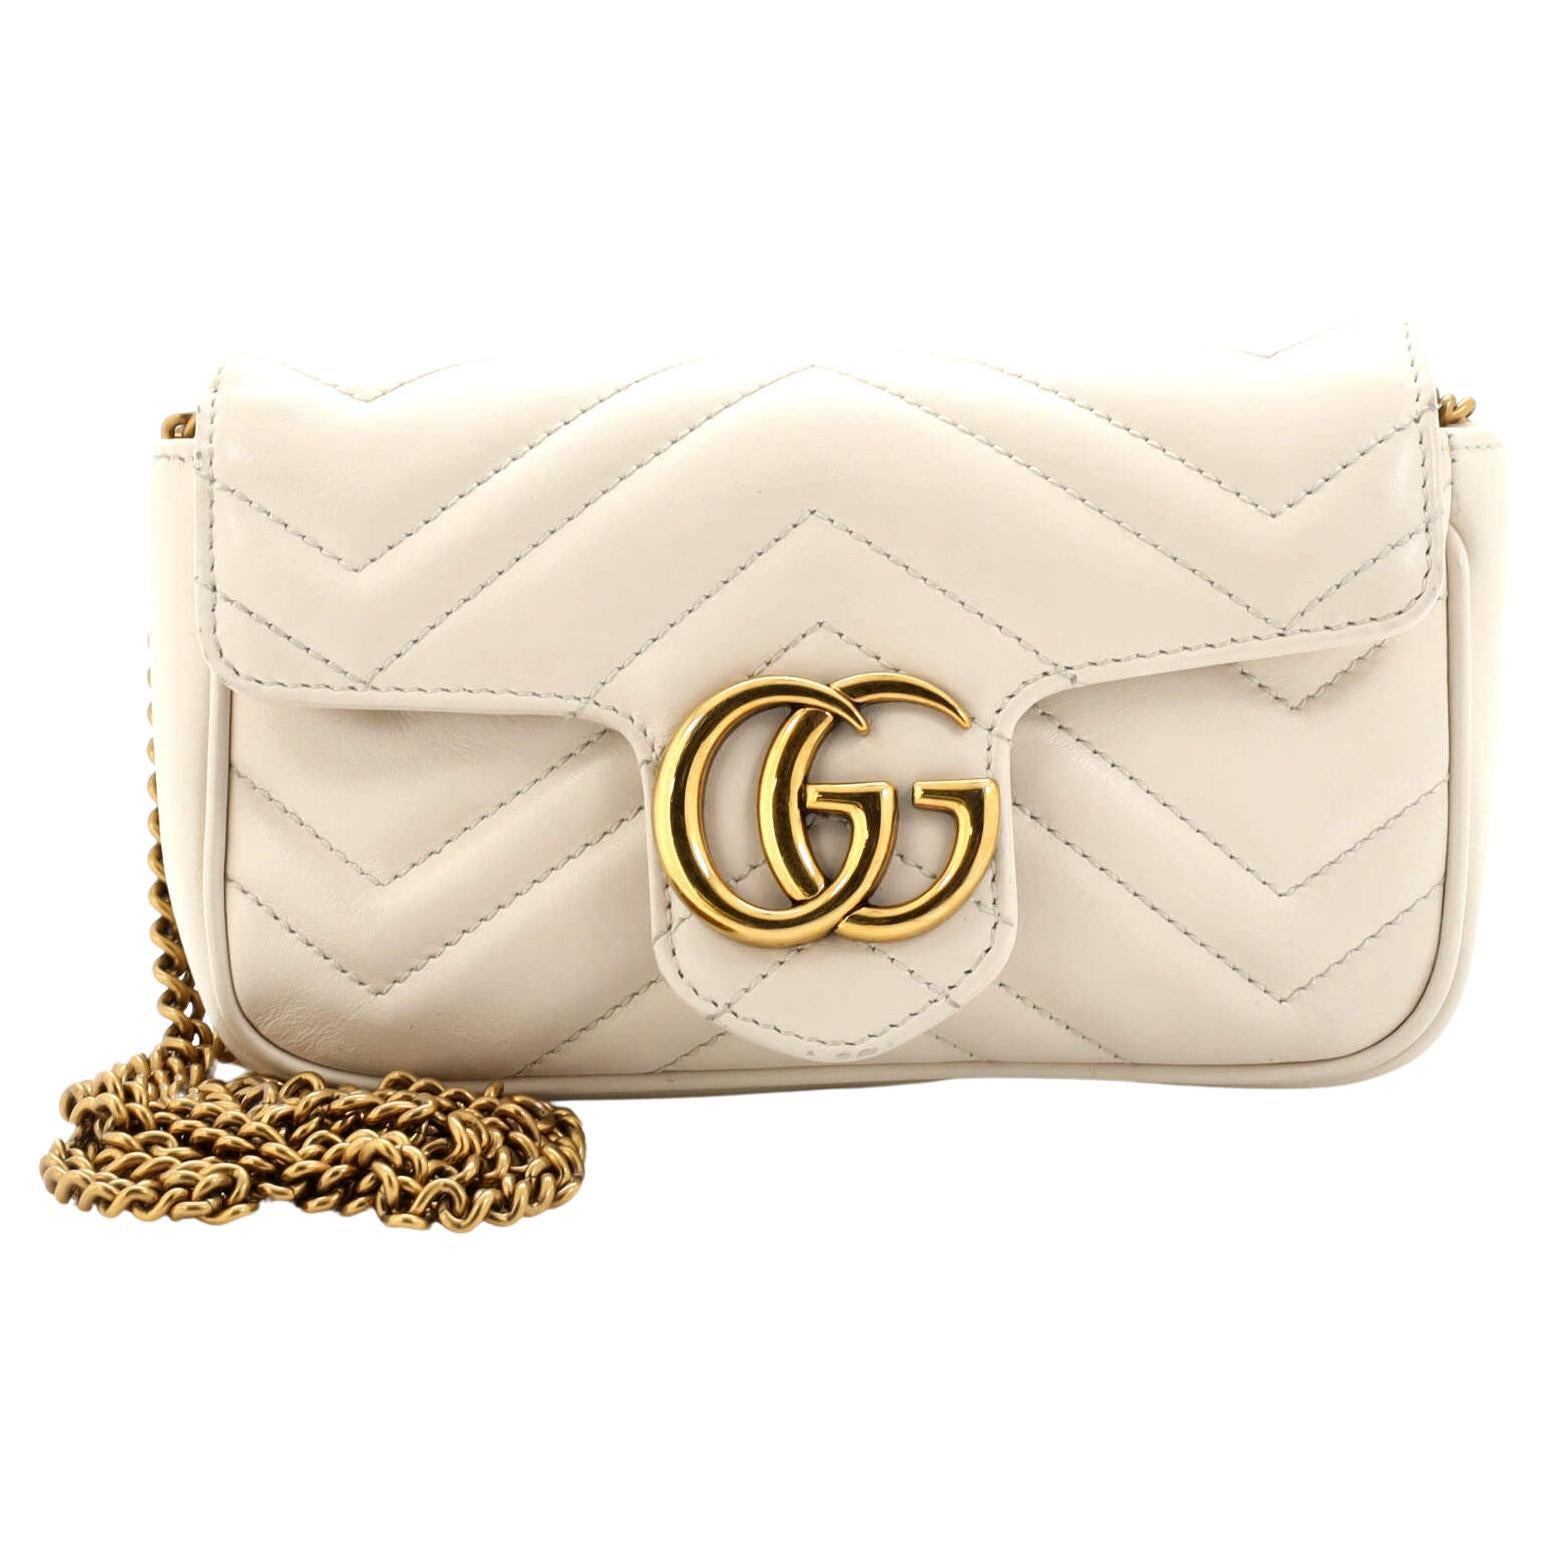 Do Gucci bags have serial numbers? - Quora